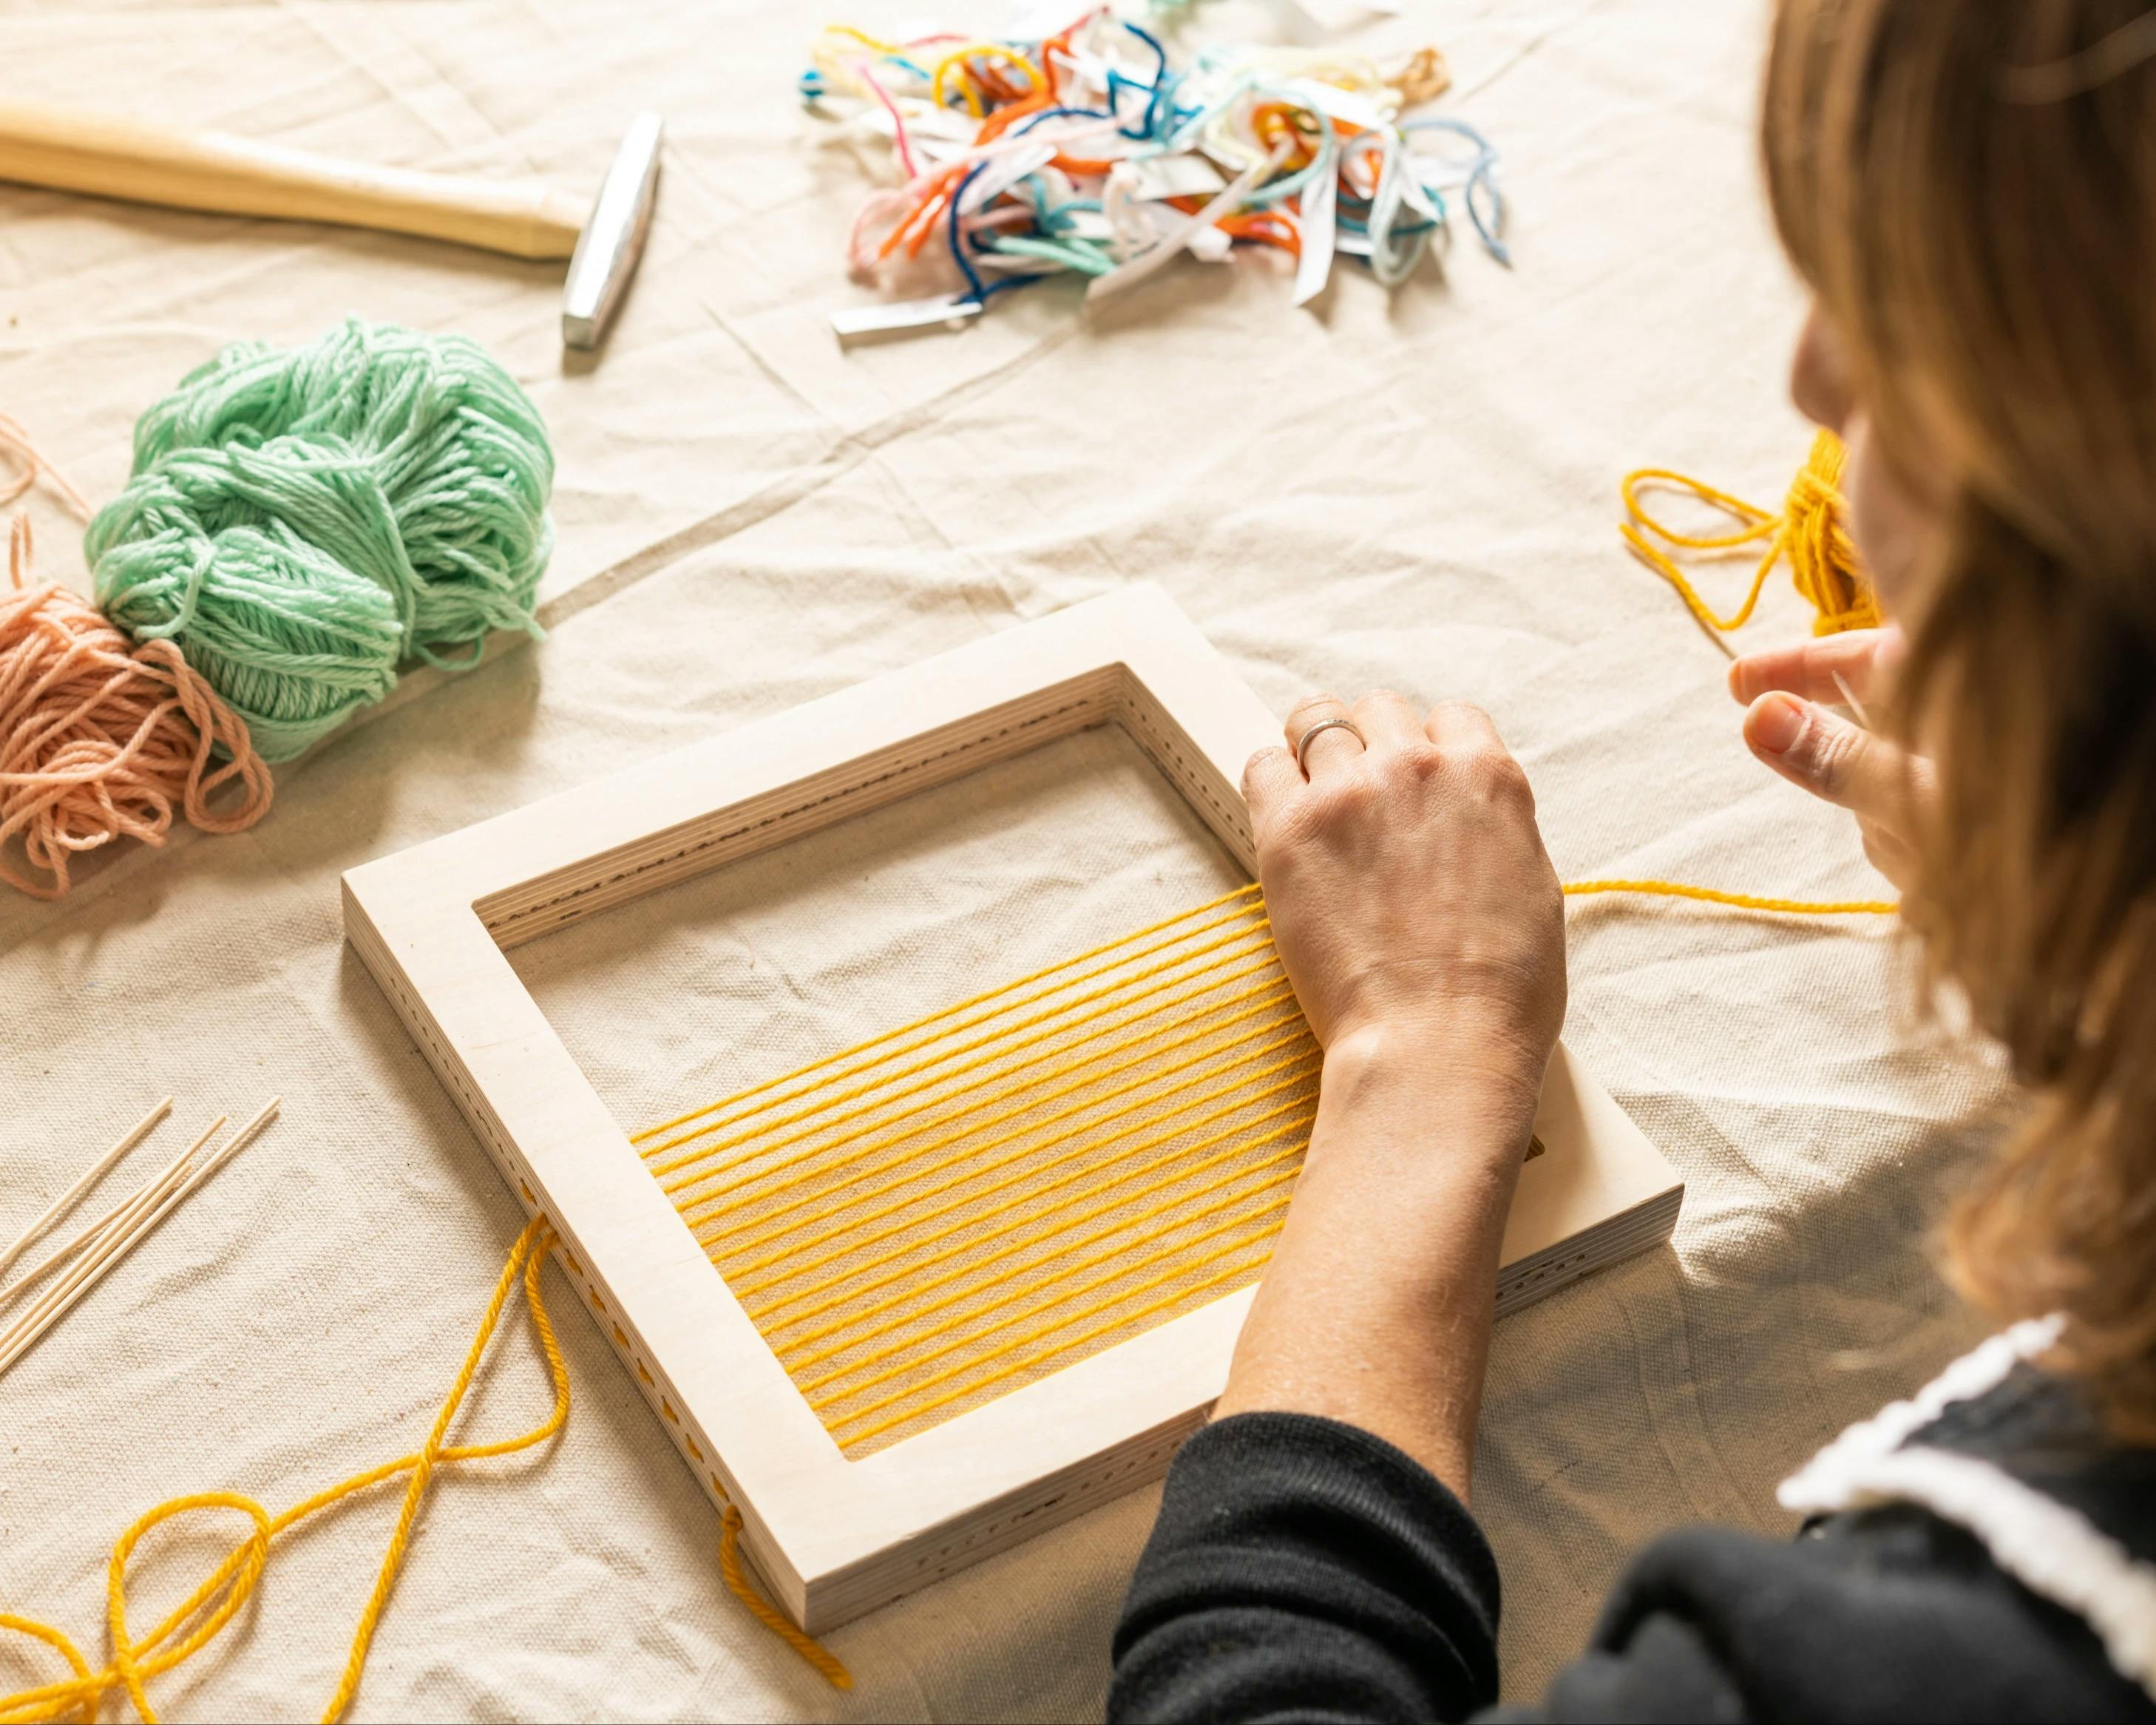 Artist Hayley Sheldon pulling yellow thread through a wood frame at MacArthur Place.